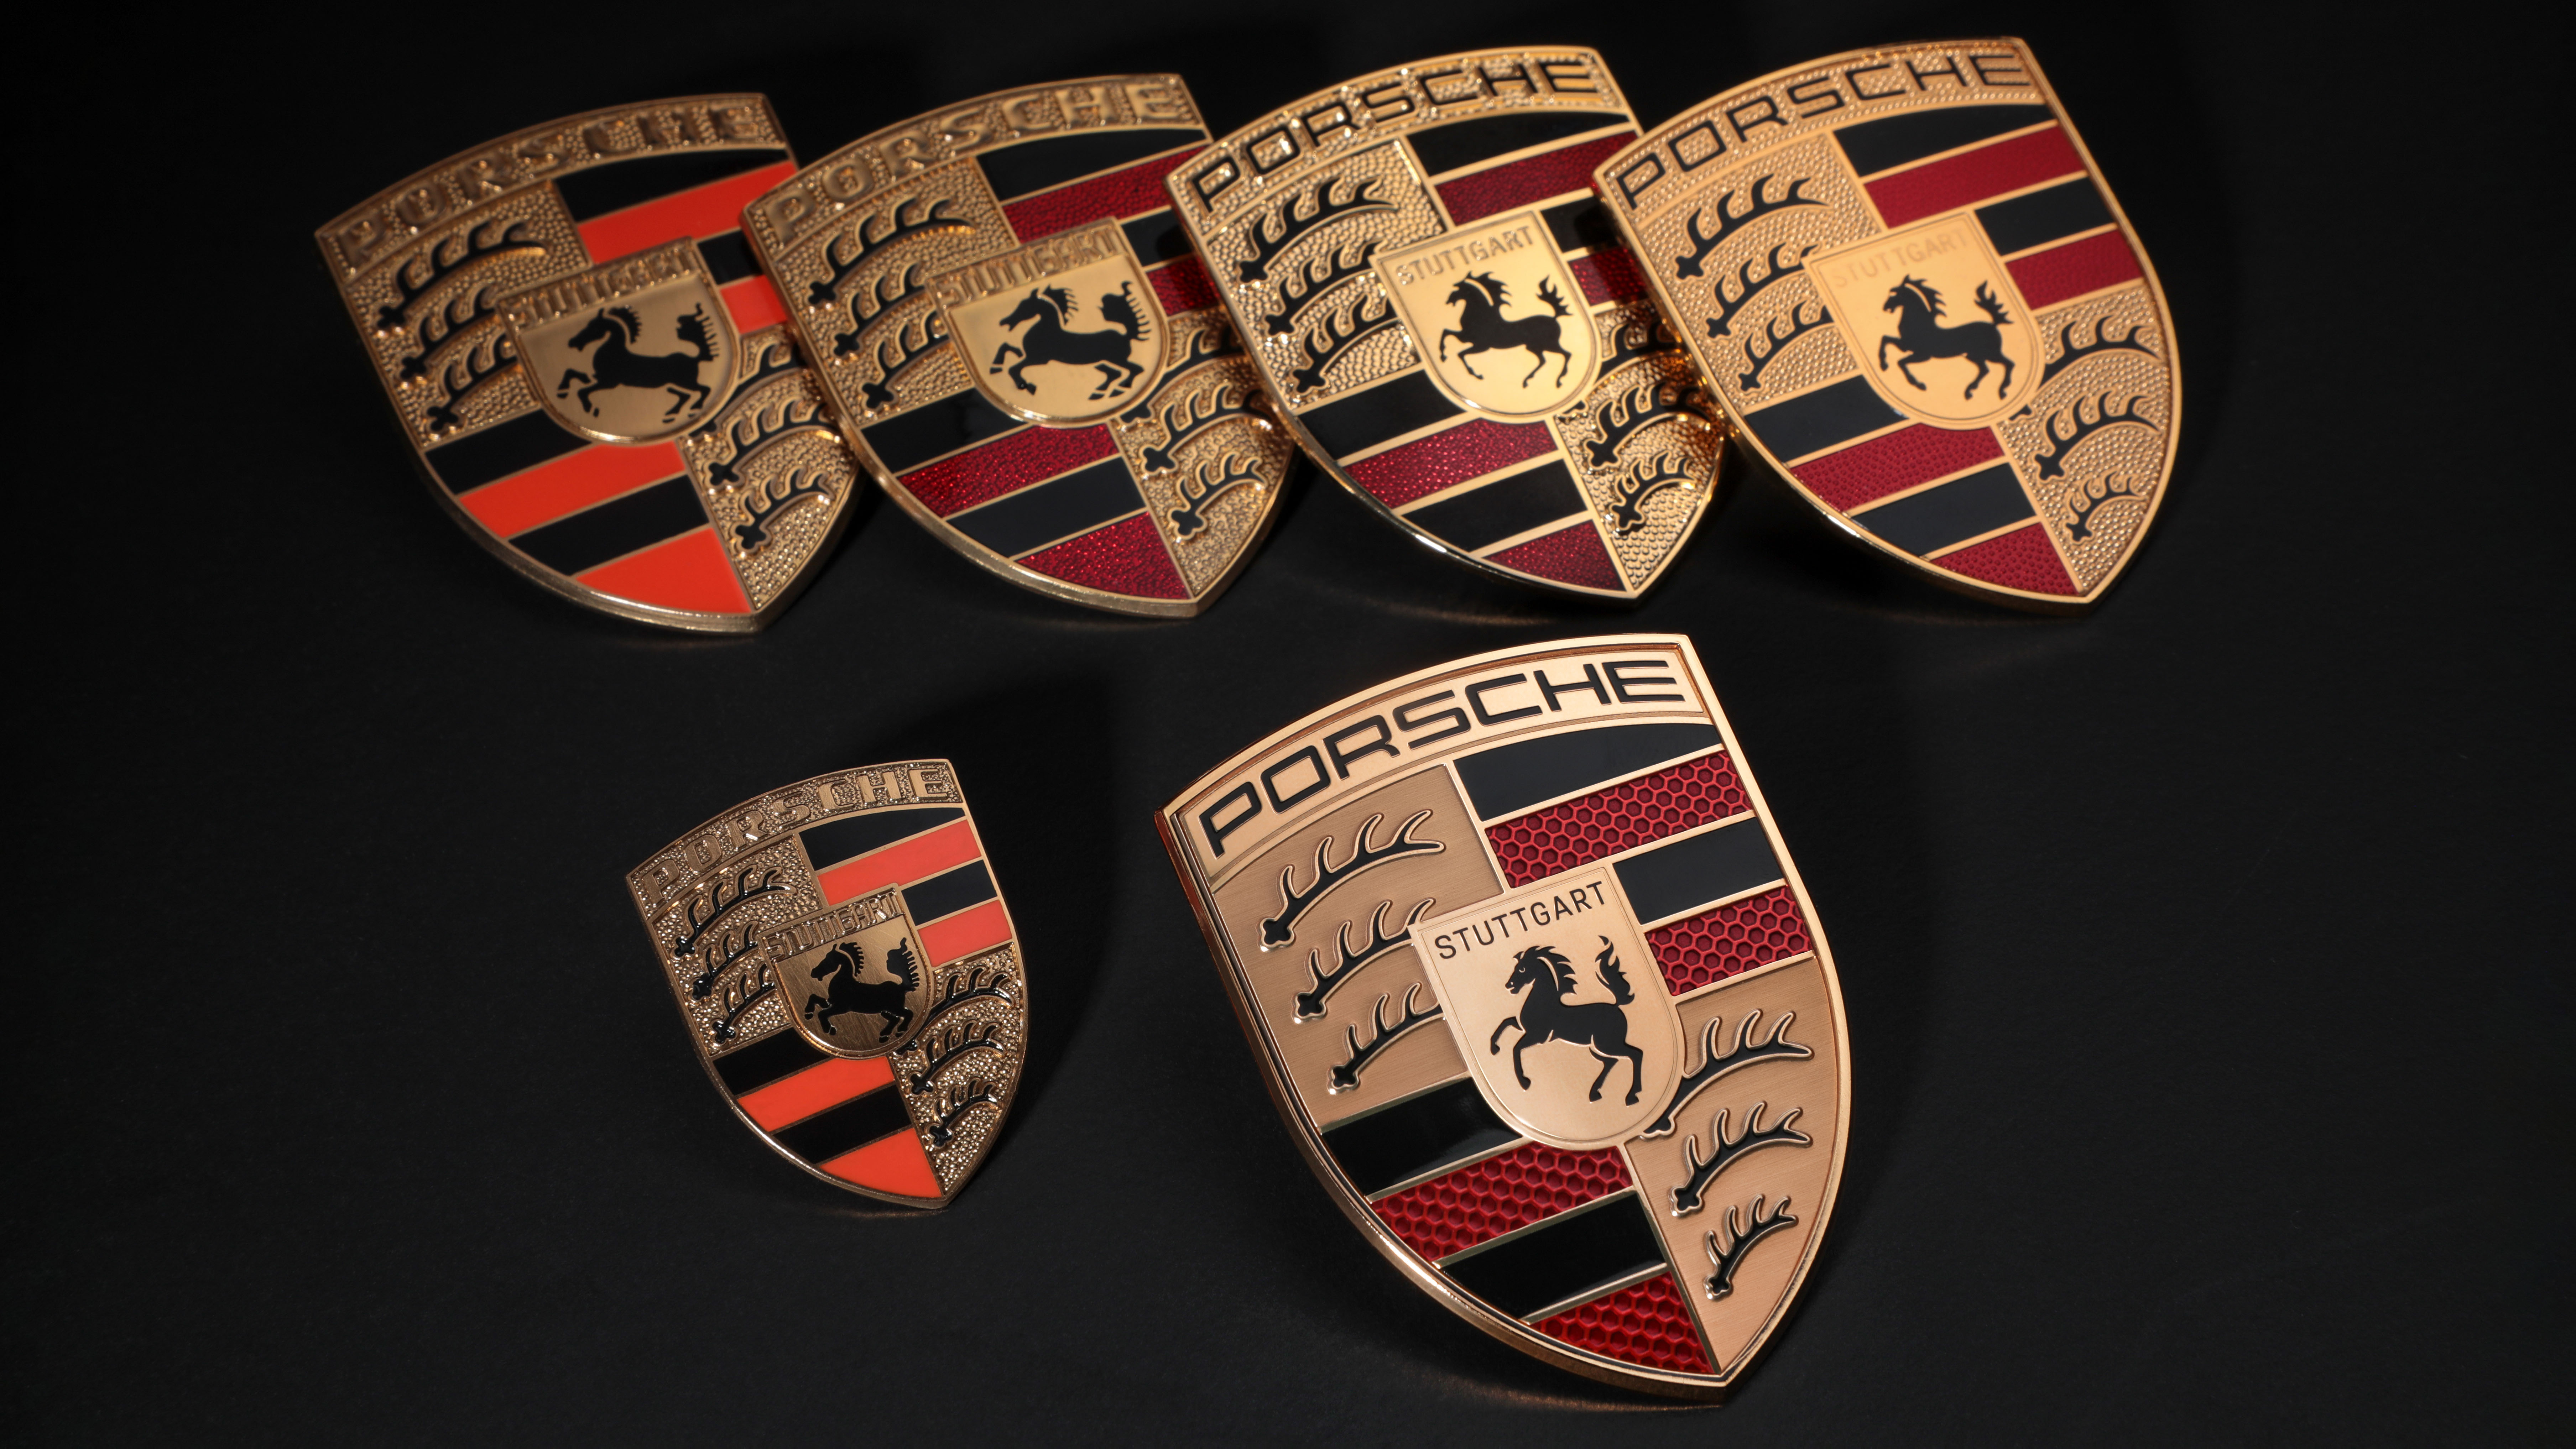 Line-up various Porsche crests and logos over time